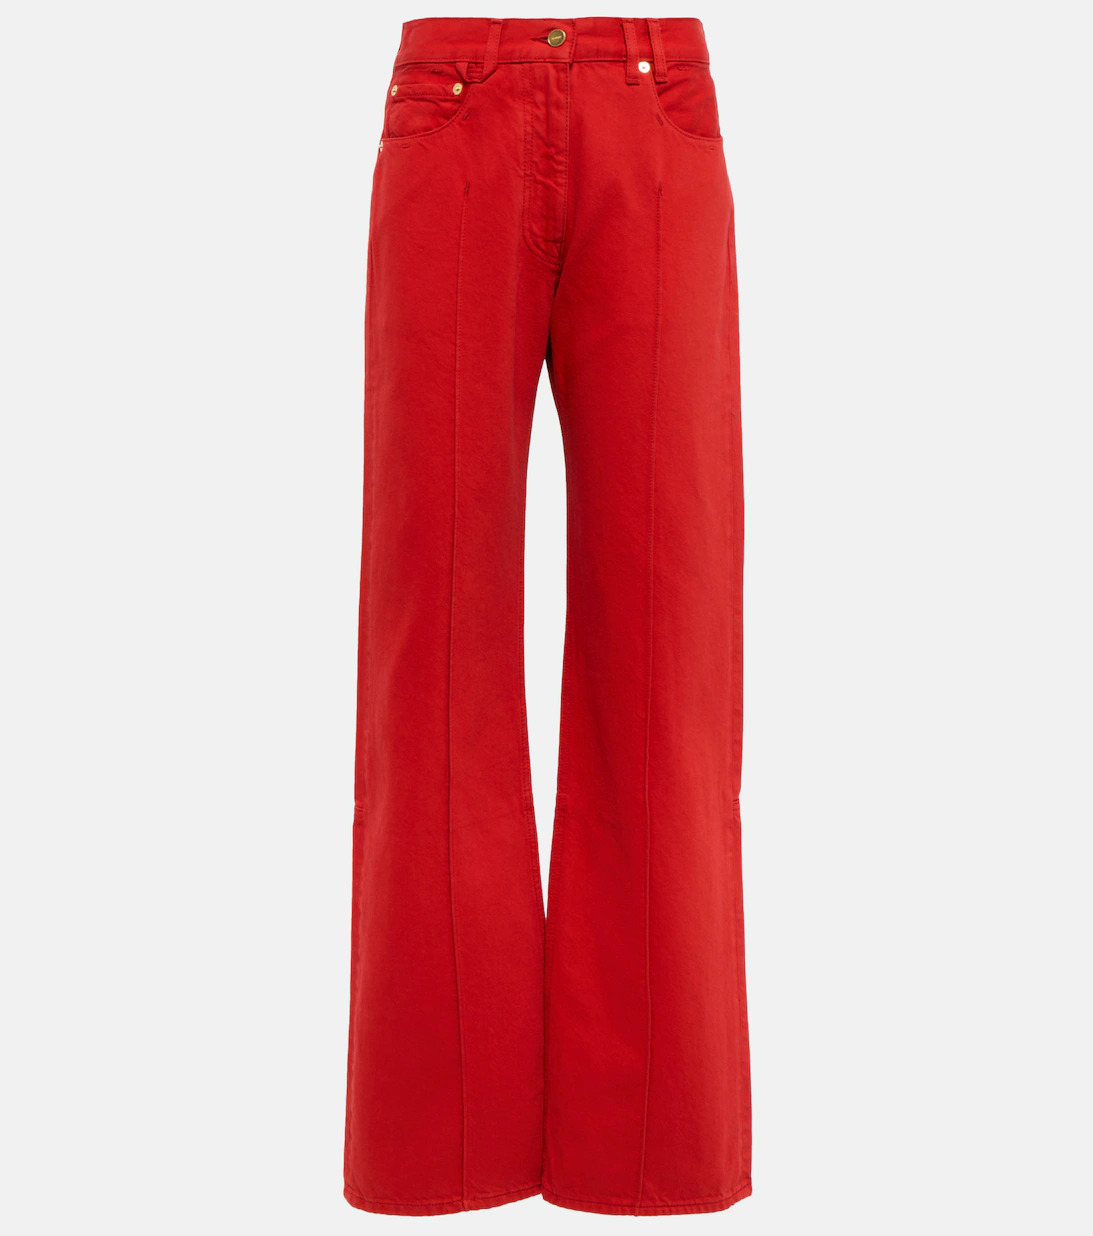 Alexa Chung's Red Jeans Outfit Is So Easy to Copy | Who What Wear UK